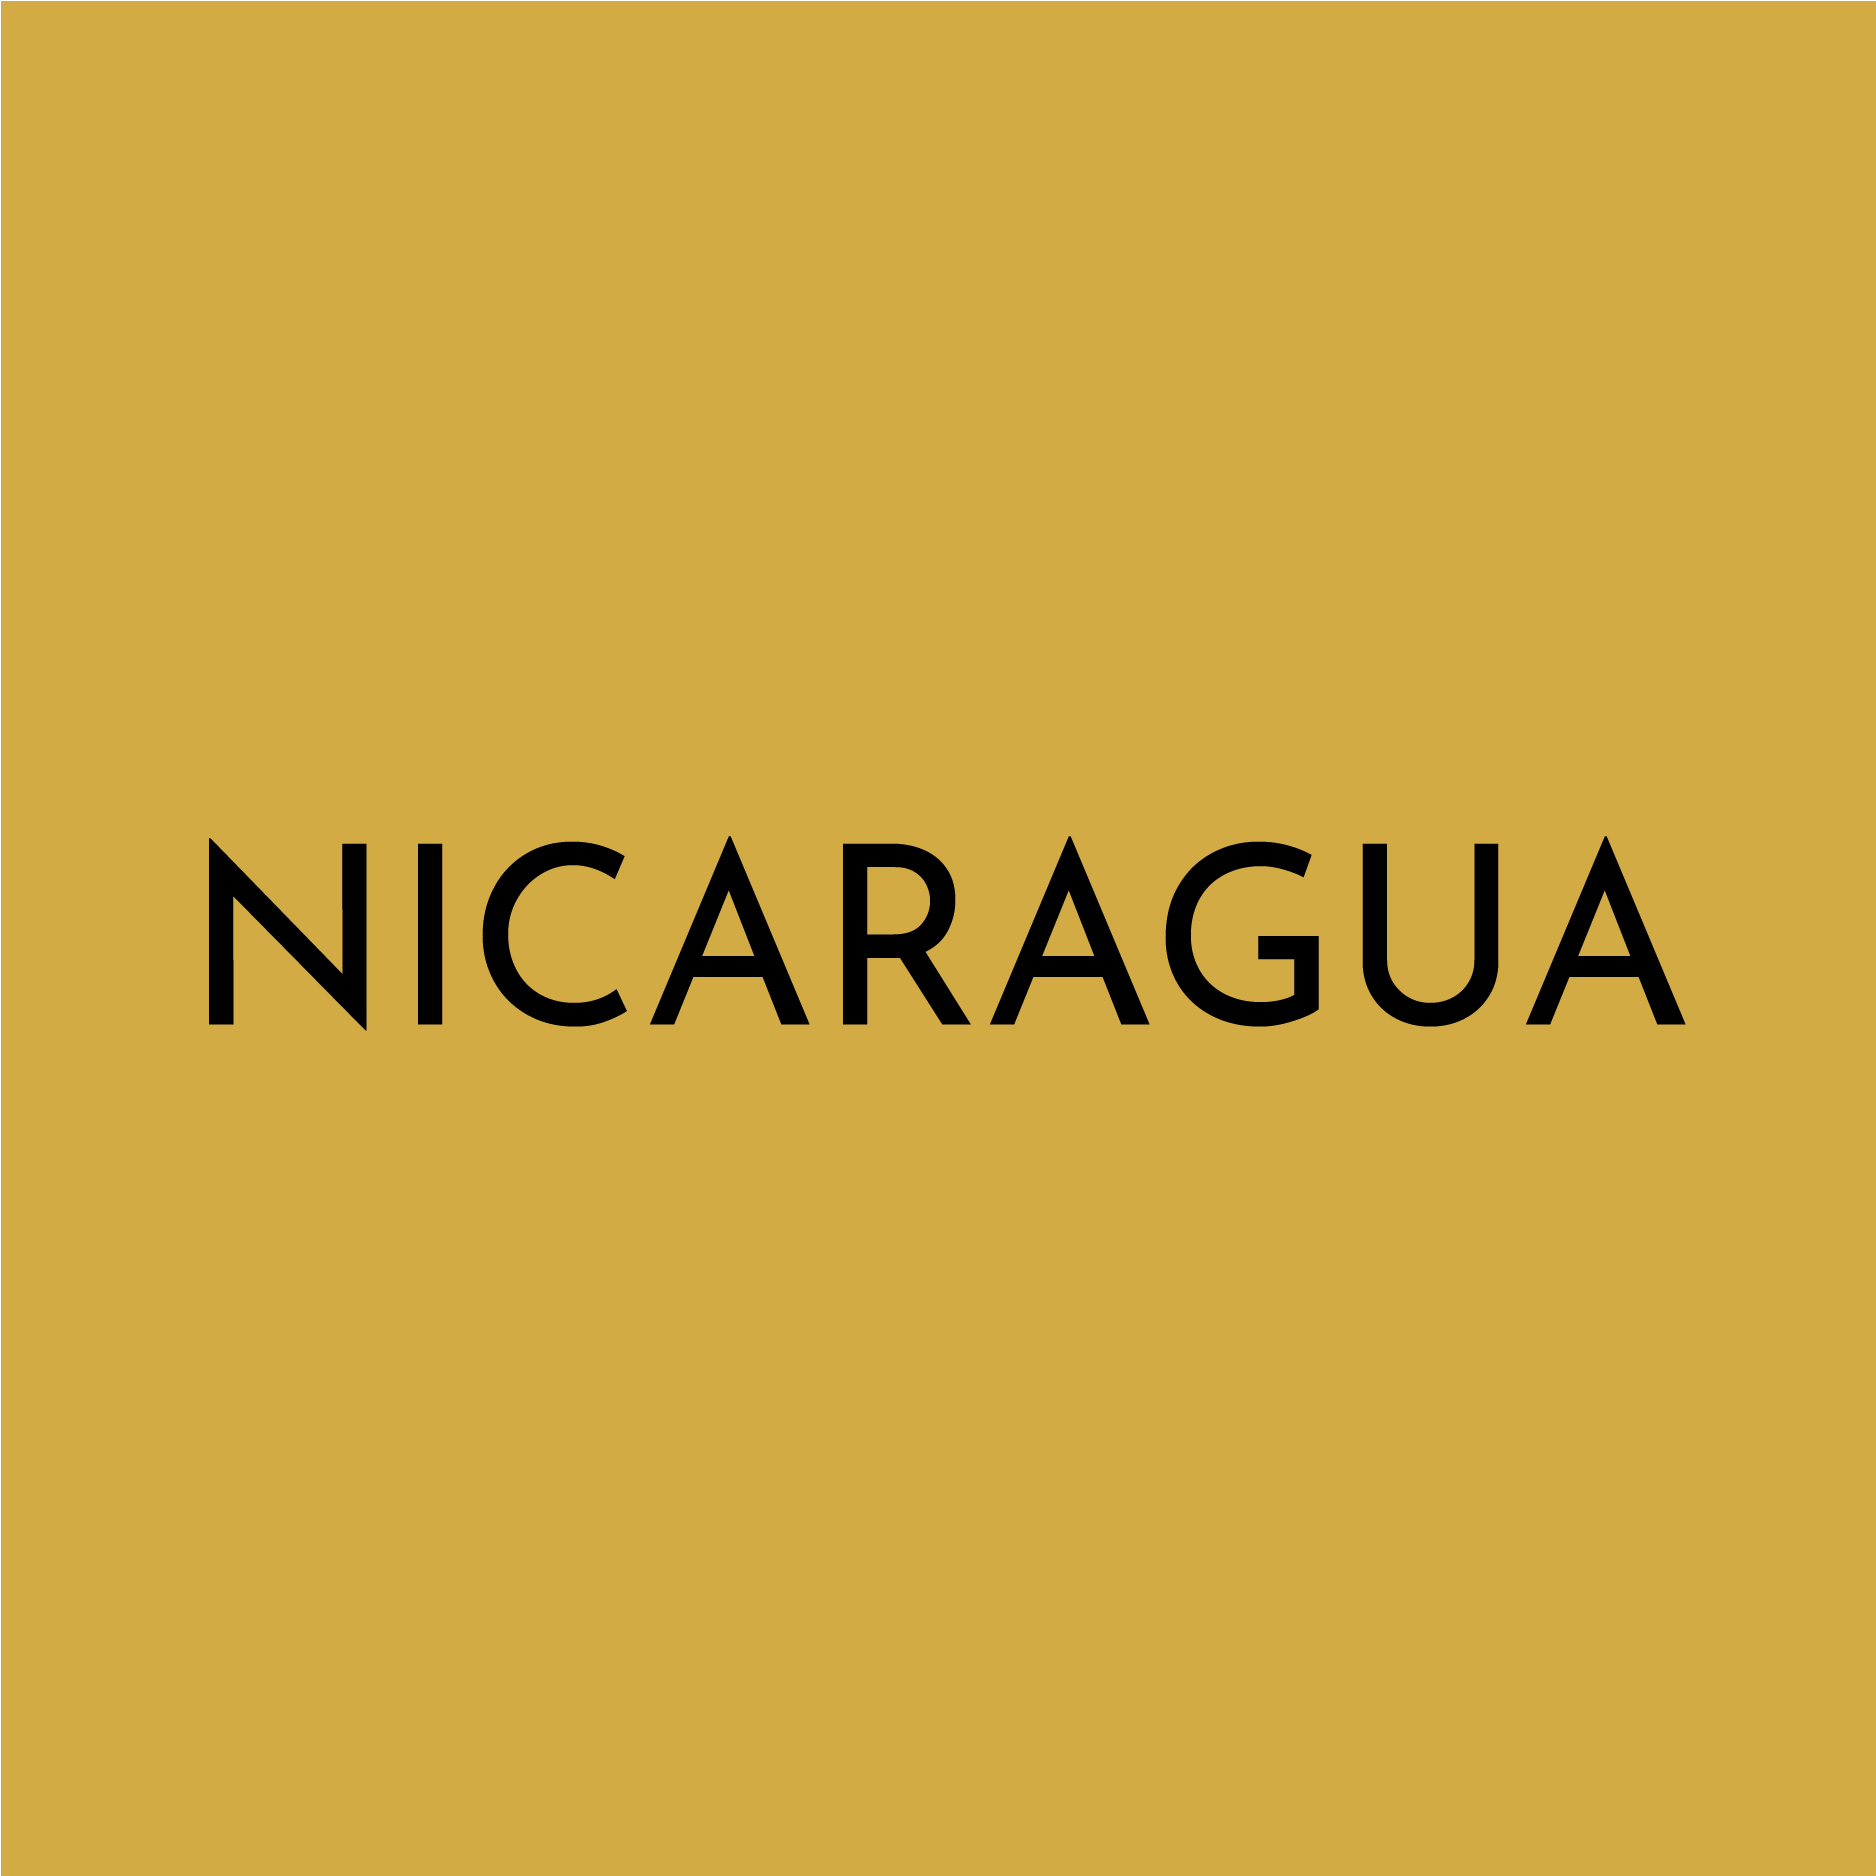 A solid yellow block contains the text “NICARAGUA”